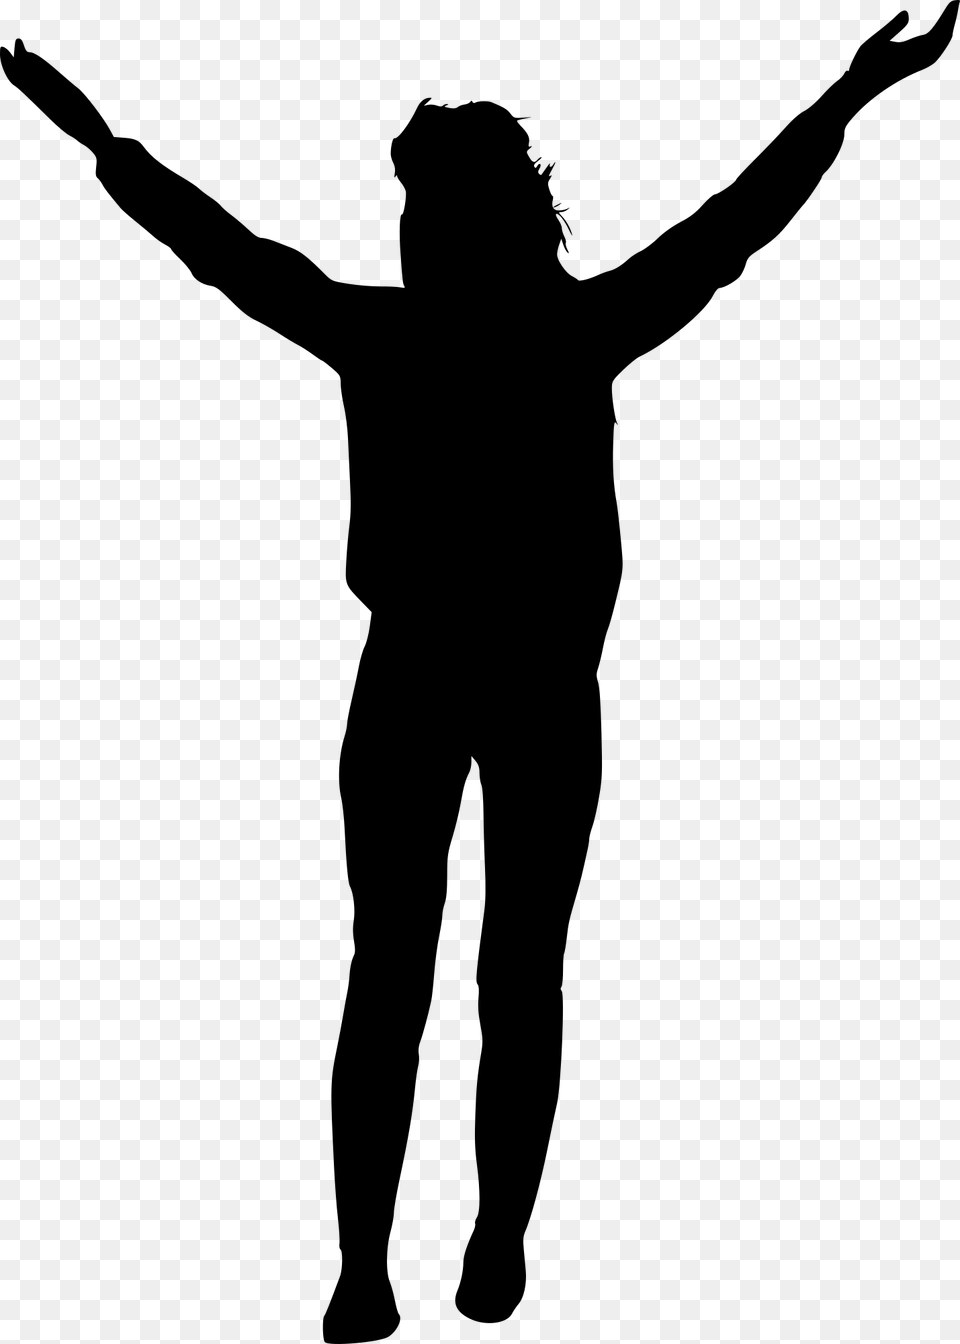 Silhouette People With Hands Up, Gray Png Image